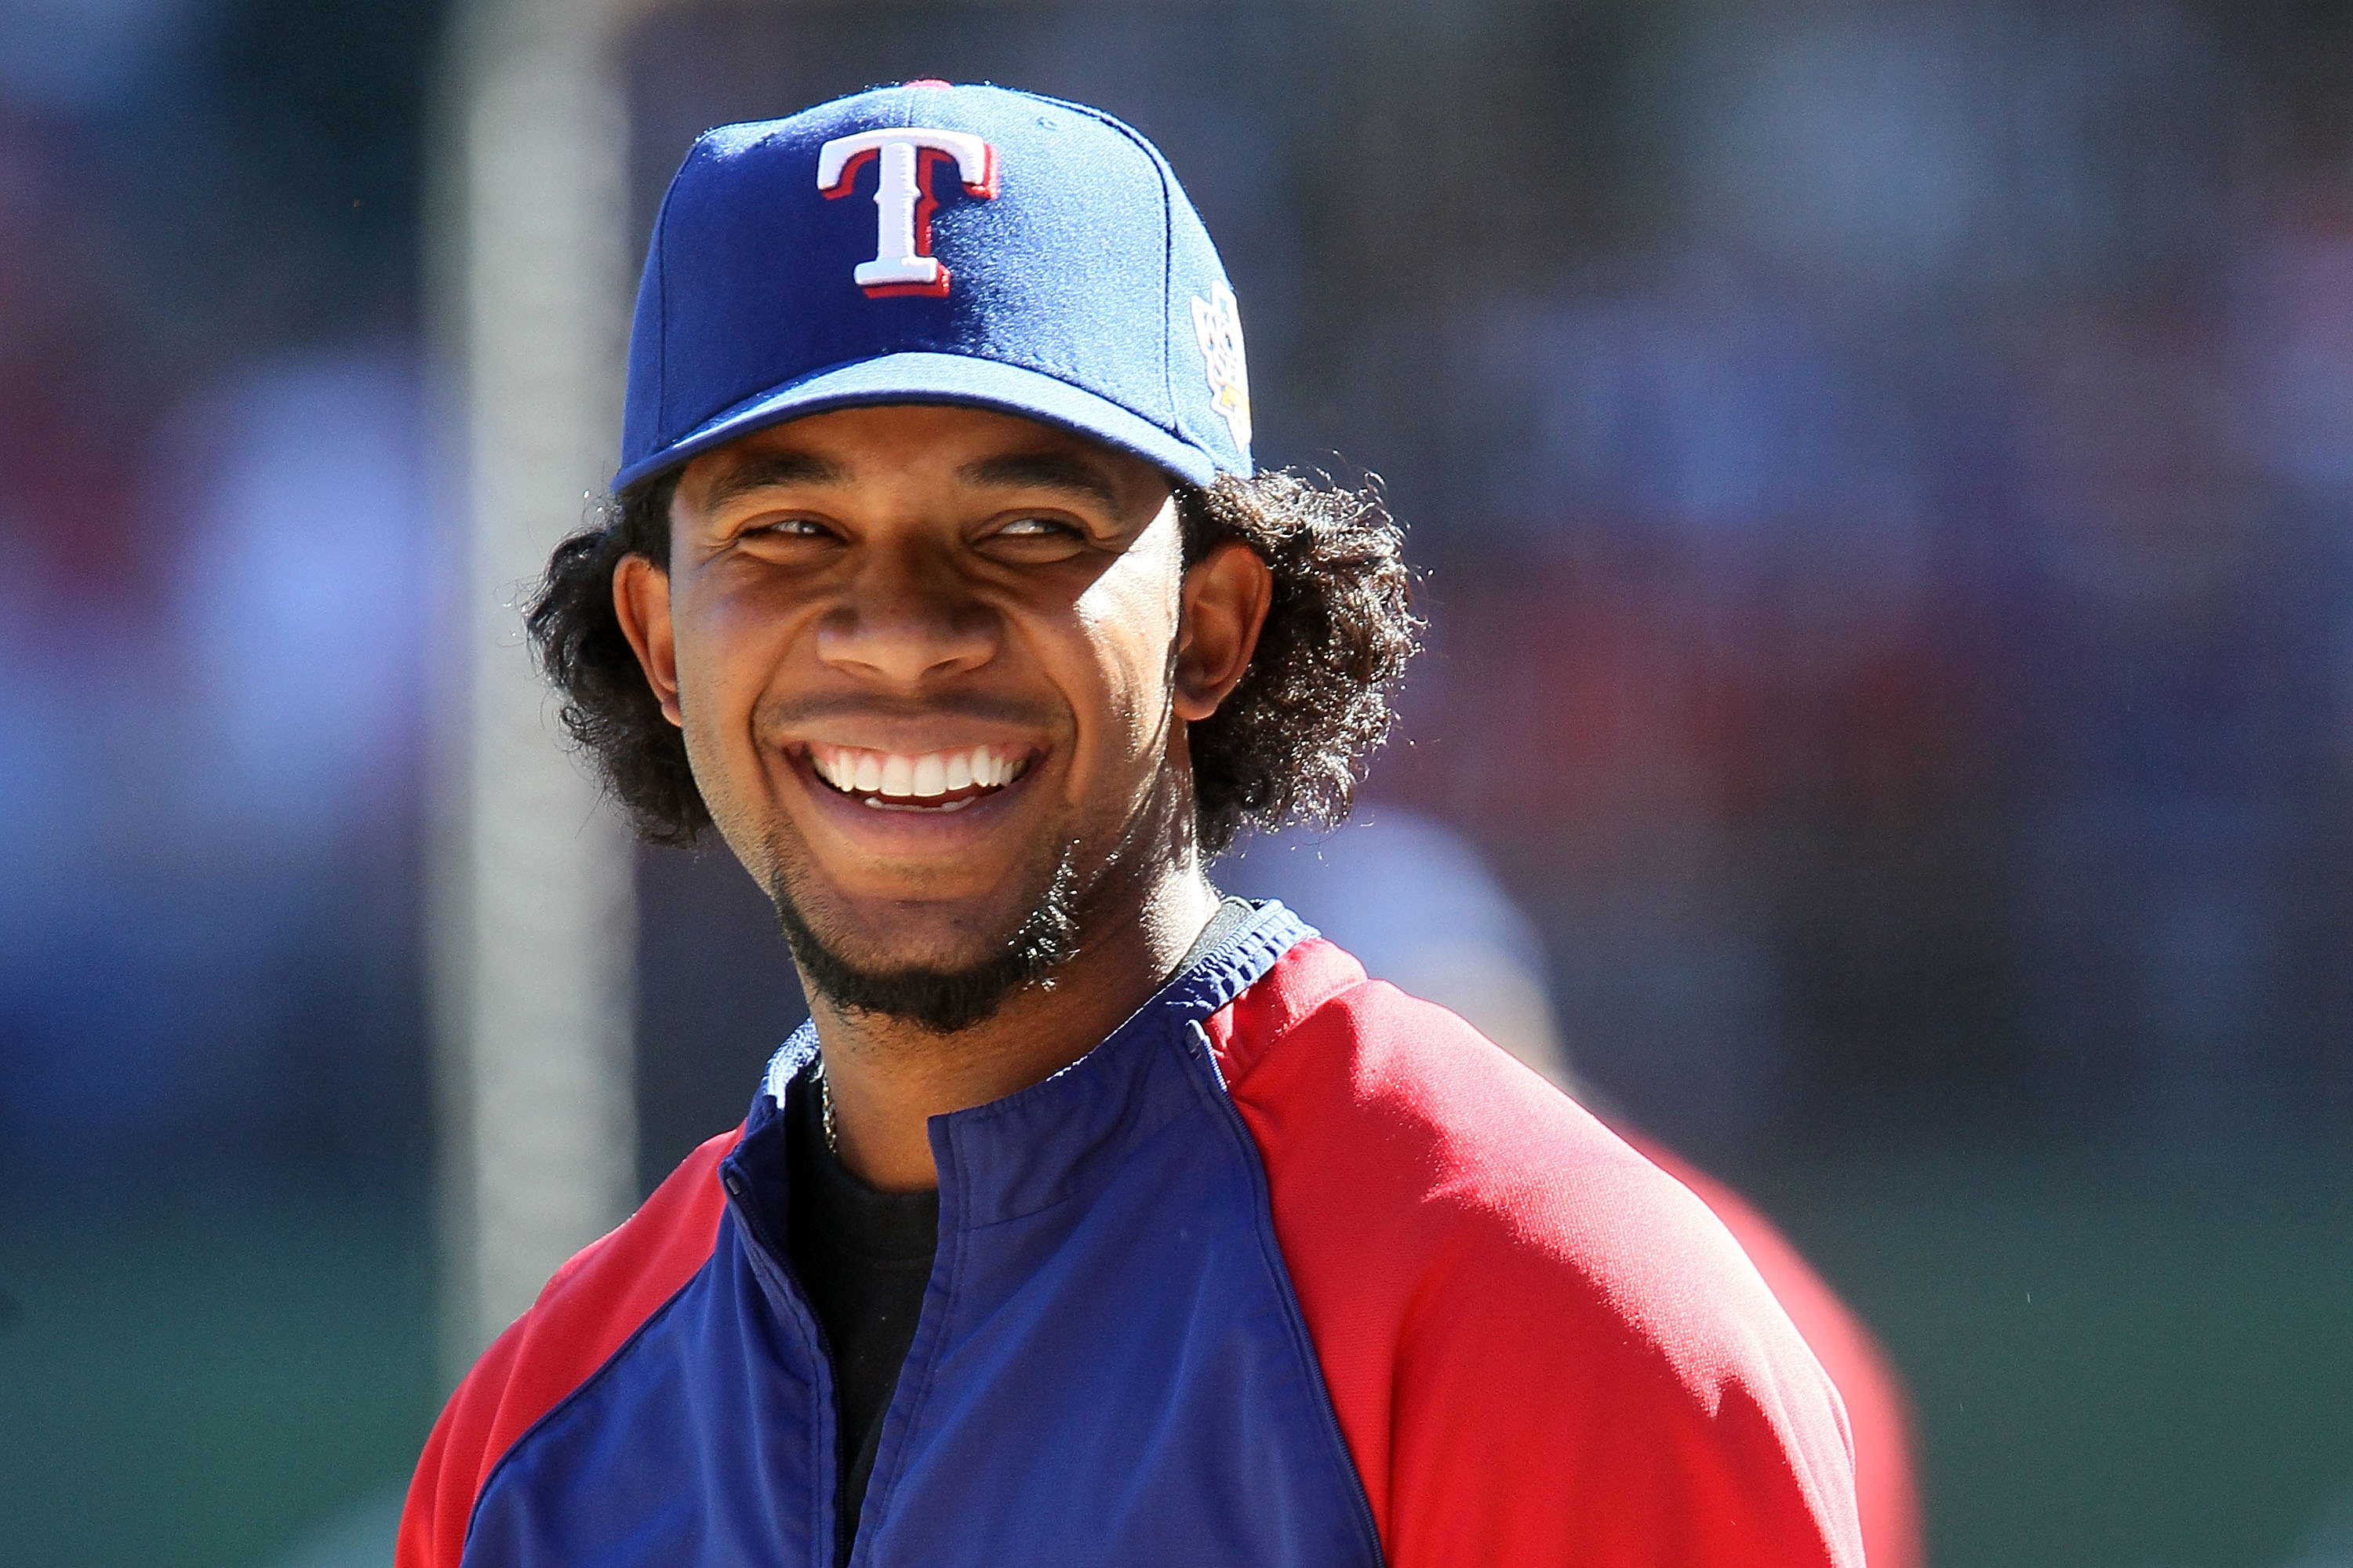 ARLINGTON, TX - OCTOBER 30:  Elvis Andrus #1 of the Texas Rangers looks on during batting practice against the San Francisco Giants in Game Three of the 2010 MLB World Series at Rangers Ballpark in Arlington on October 30, 2010 in Arlington, Texas.  (Phot